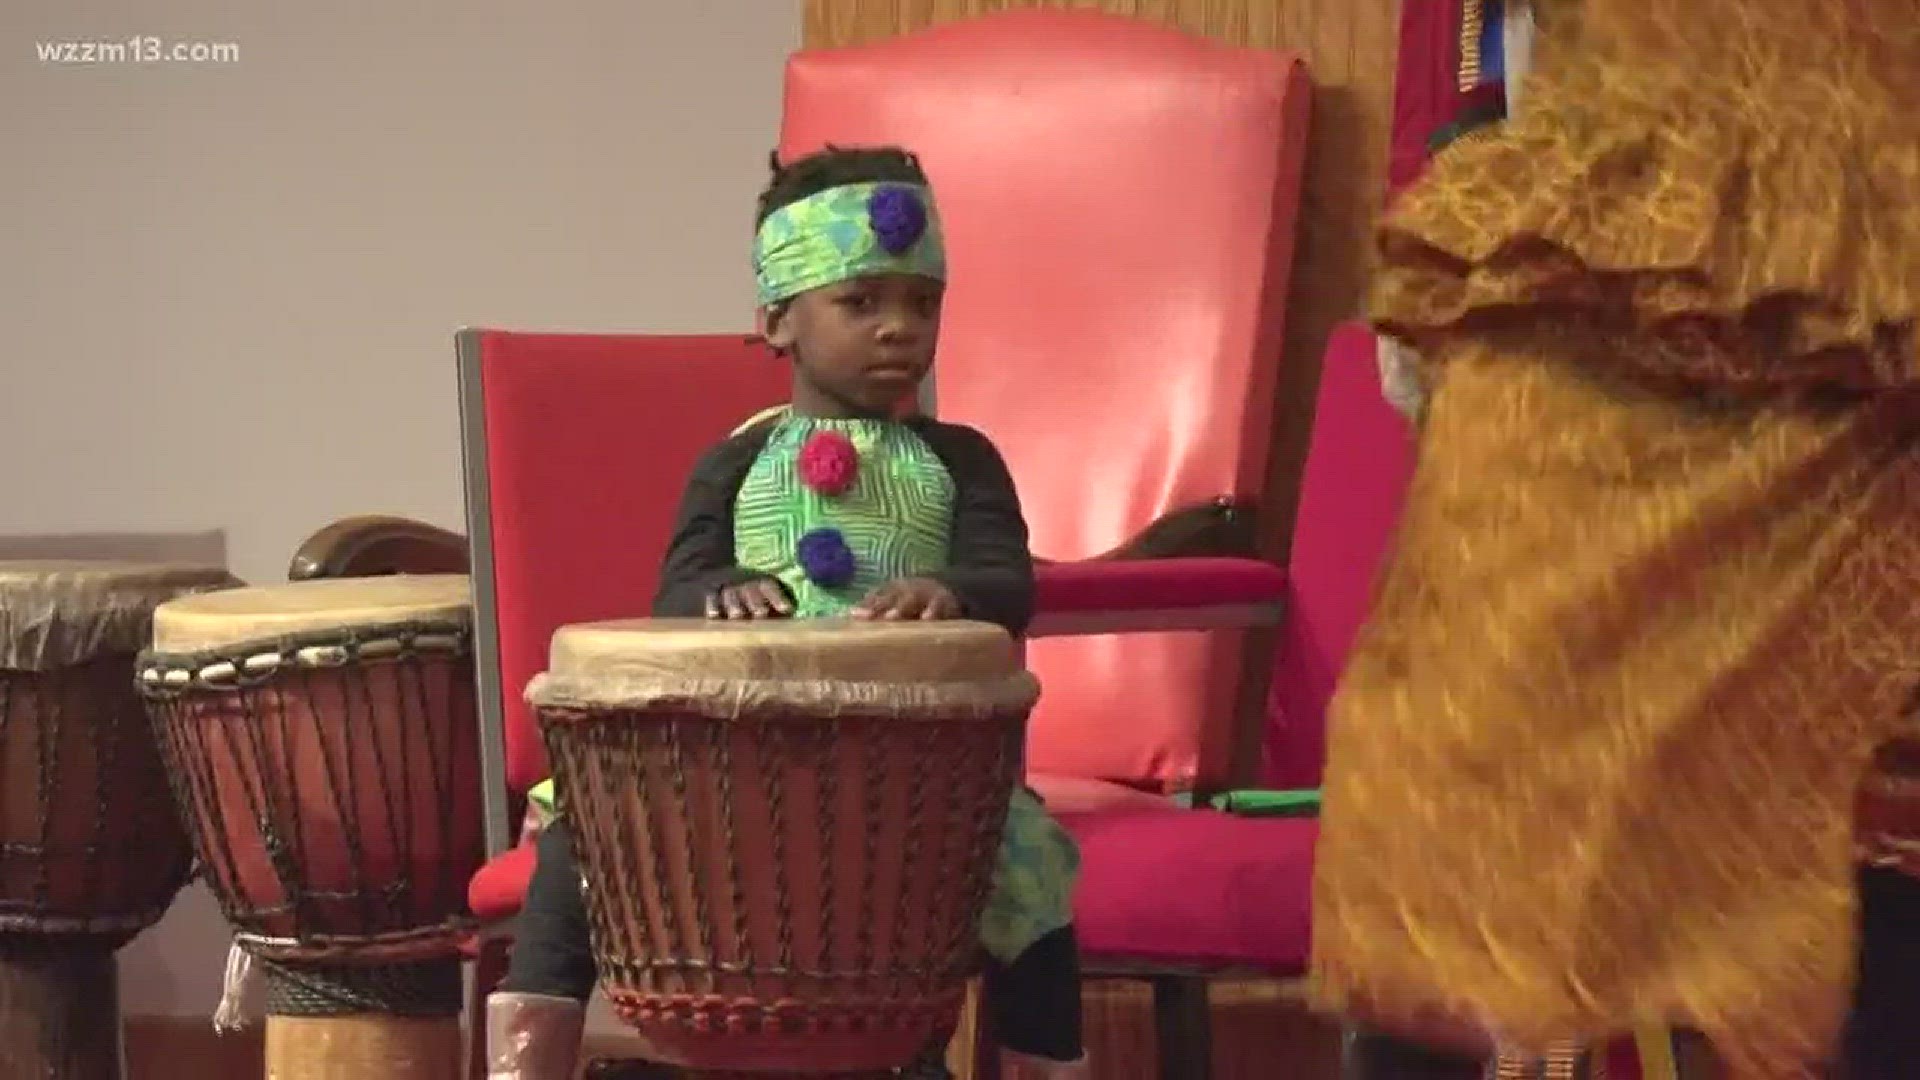 The West Michigan Jewels Of Africa held a special celebration at the St. Mary's Temple of Peace on Saturday, Dec. 30.